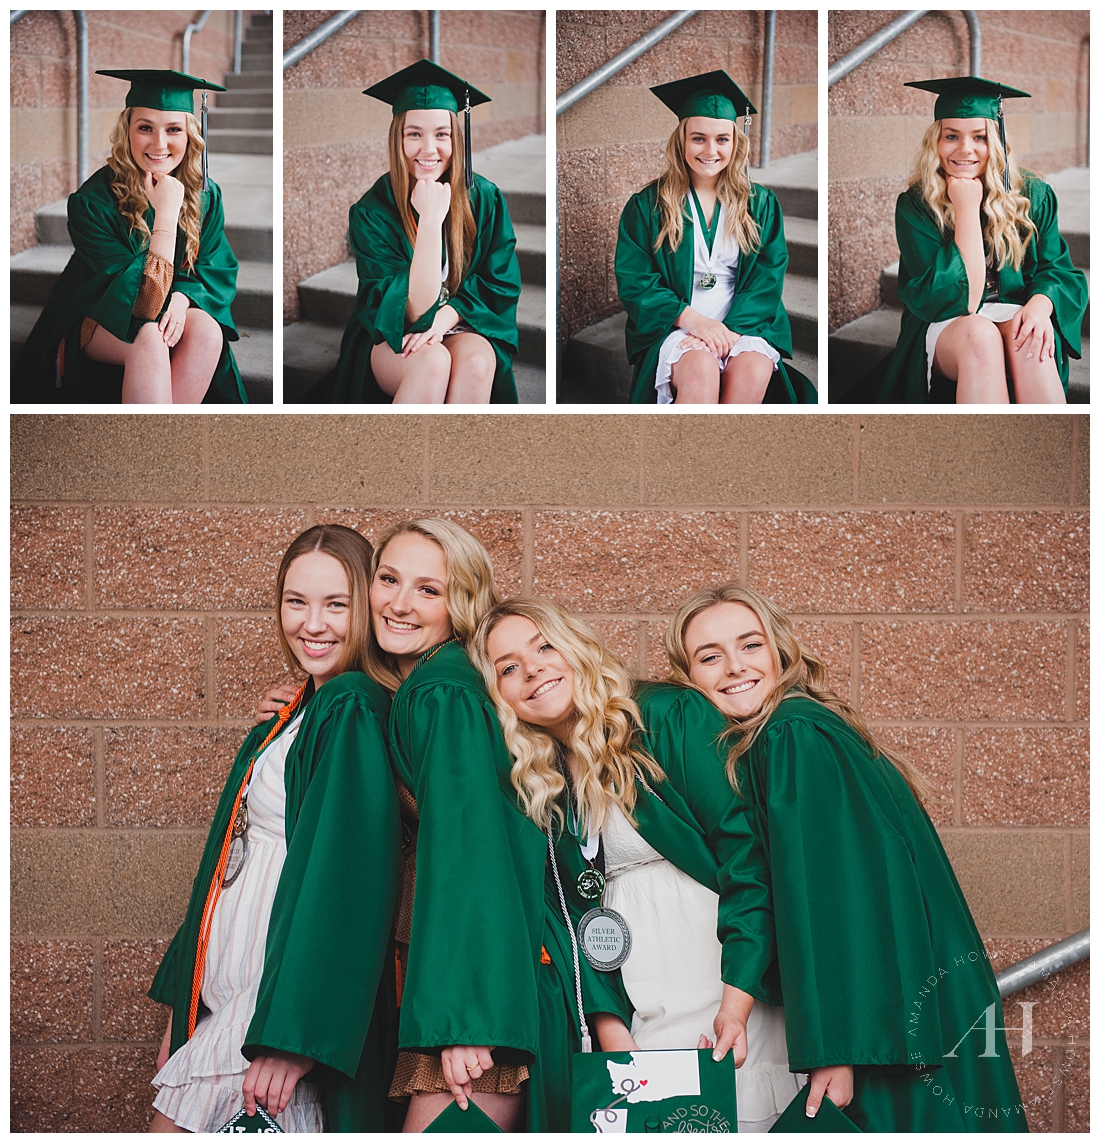 Graduation Portraits on High School Steps With Your Best Friends | How to Style a White Dress for Graduation, Hair and Makeup Inspo for High School Seniors | Photographed by the Best Tacoma Senior Portrait Photographer Amanda Howse